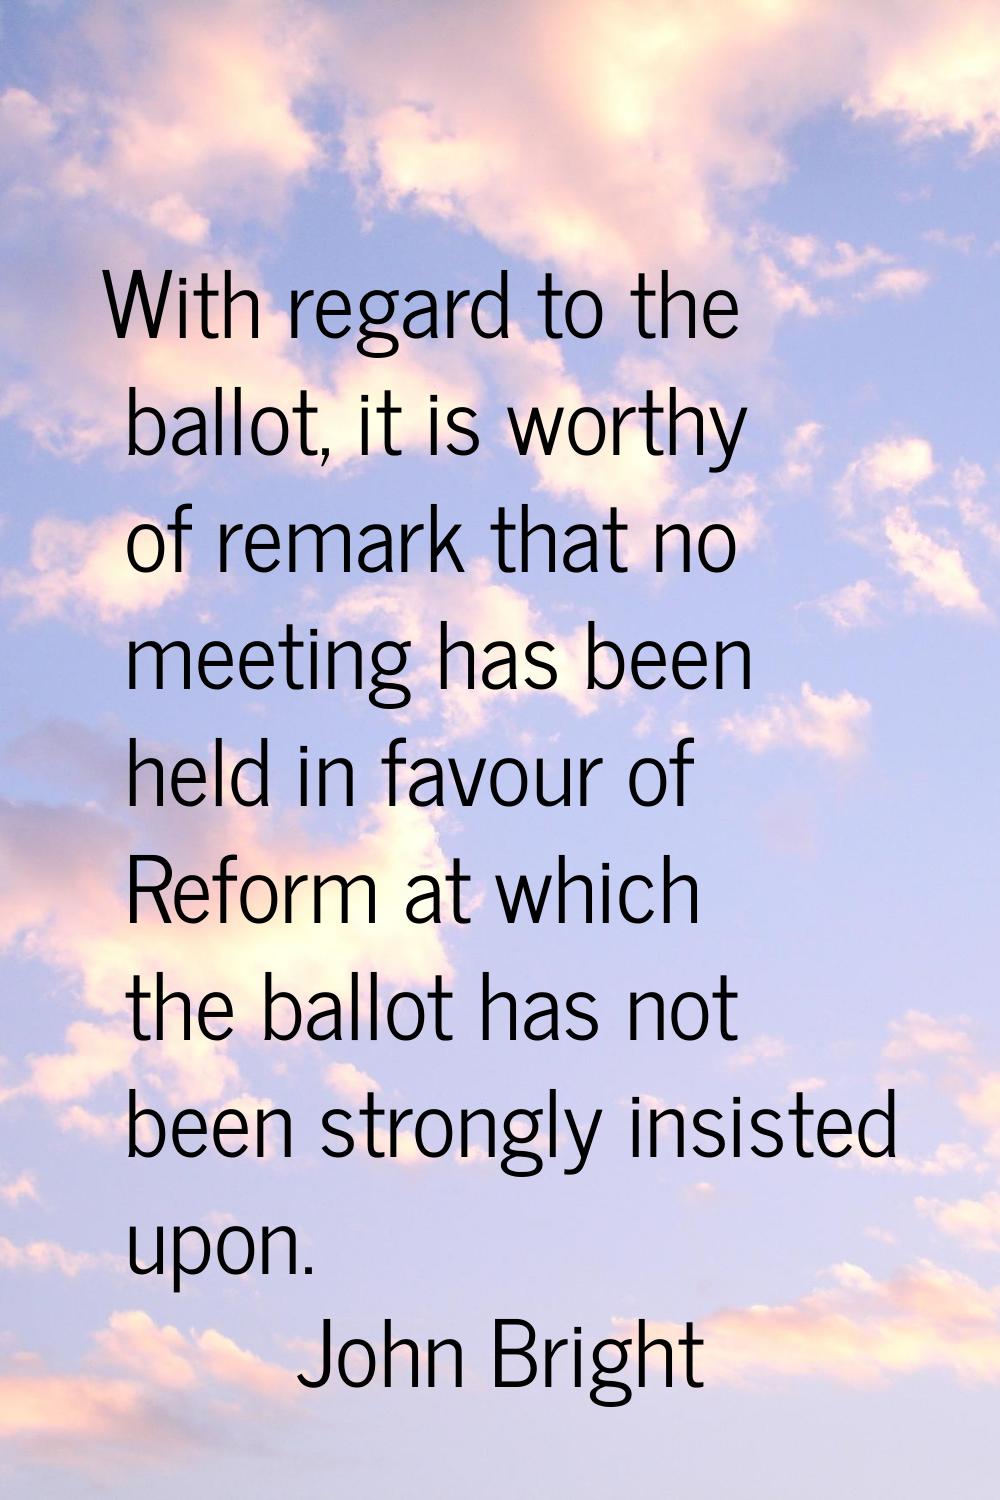 With regard to the ballot, it is worthy of remark that no meeting has been held in favour of Reform